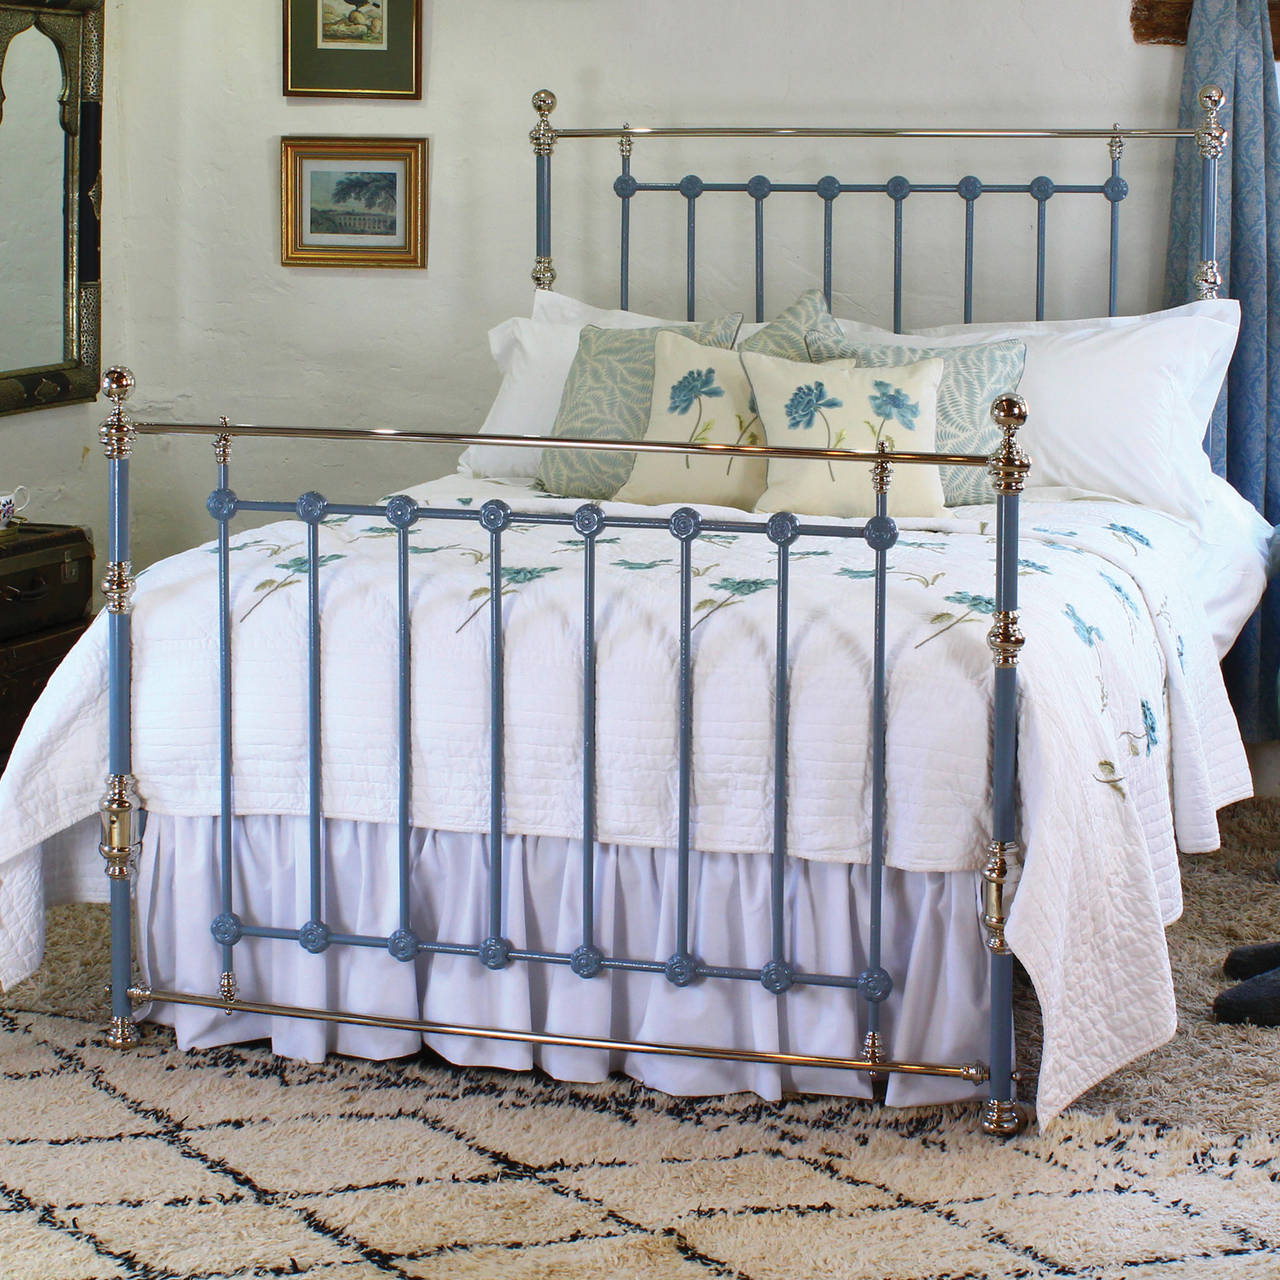 A king-size brass and iron bedstead finished in ‘battleship grey’ with nickel-plated brass work.
This bed is a breakdown frame in that the panel dismantles from the outer posts releasing the cross irons so that it will go up any awkward staircase